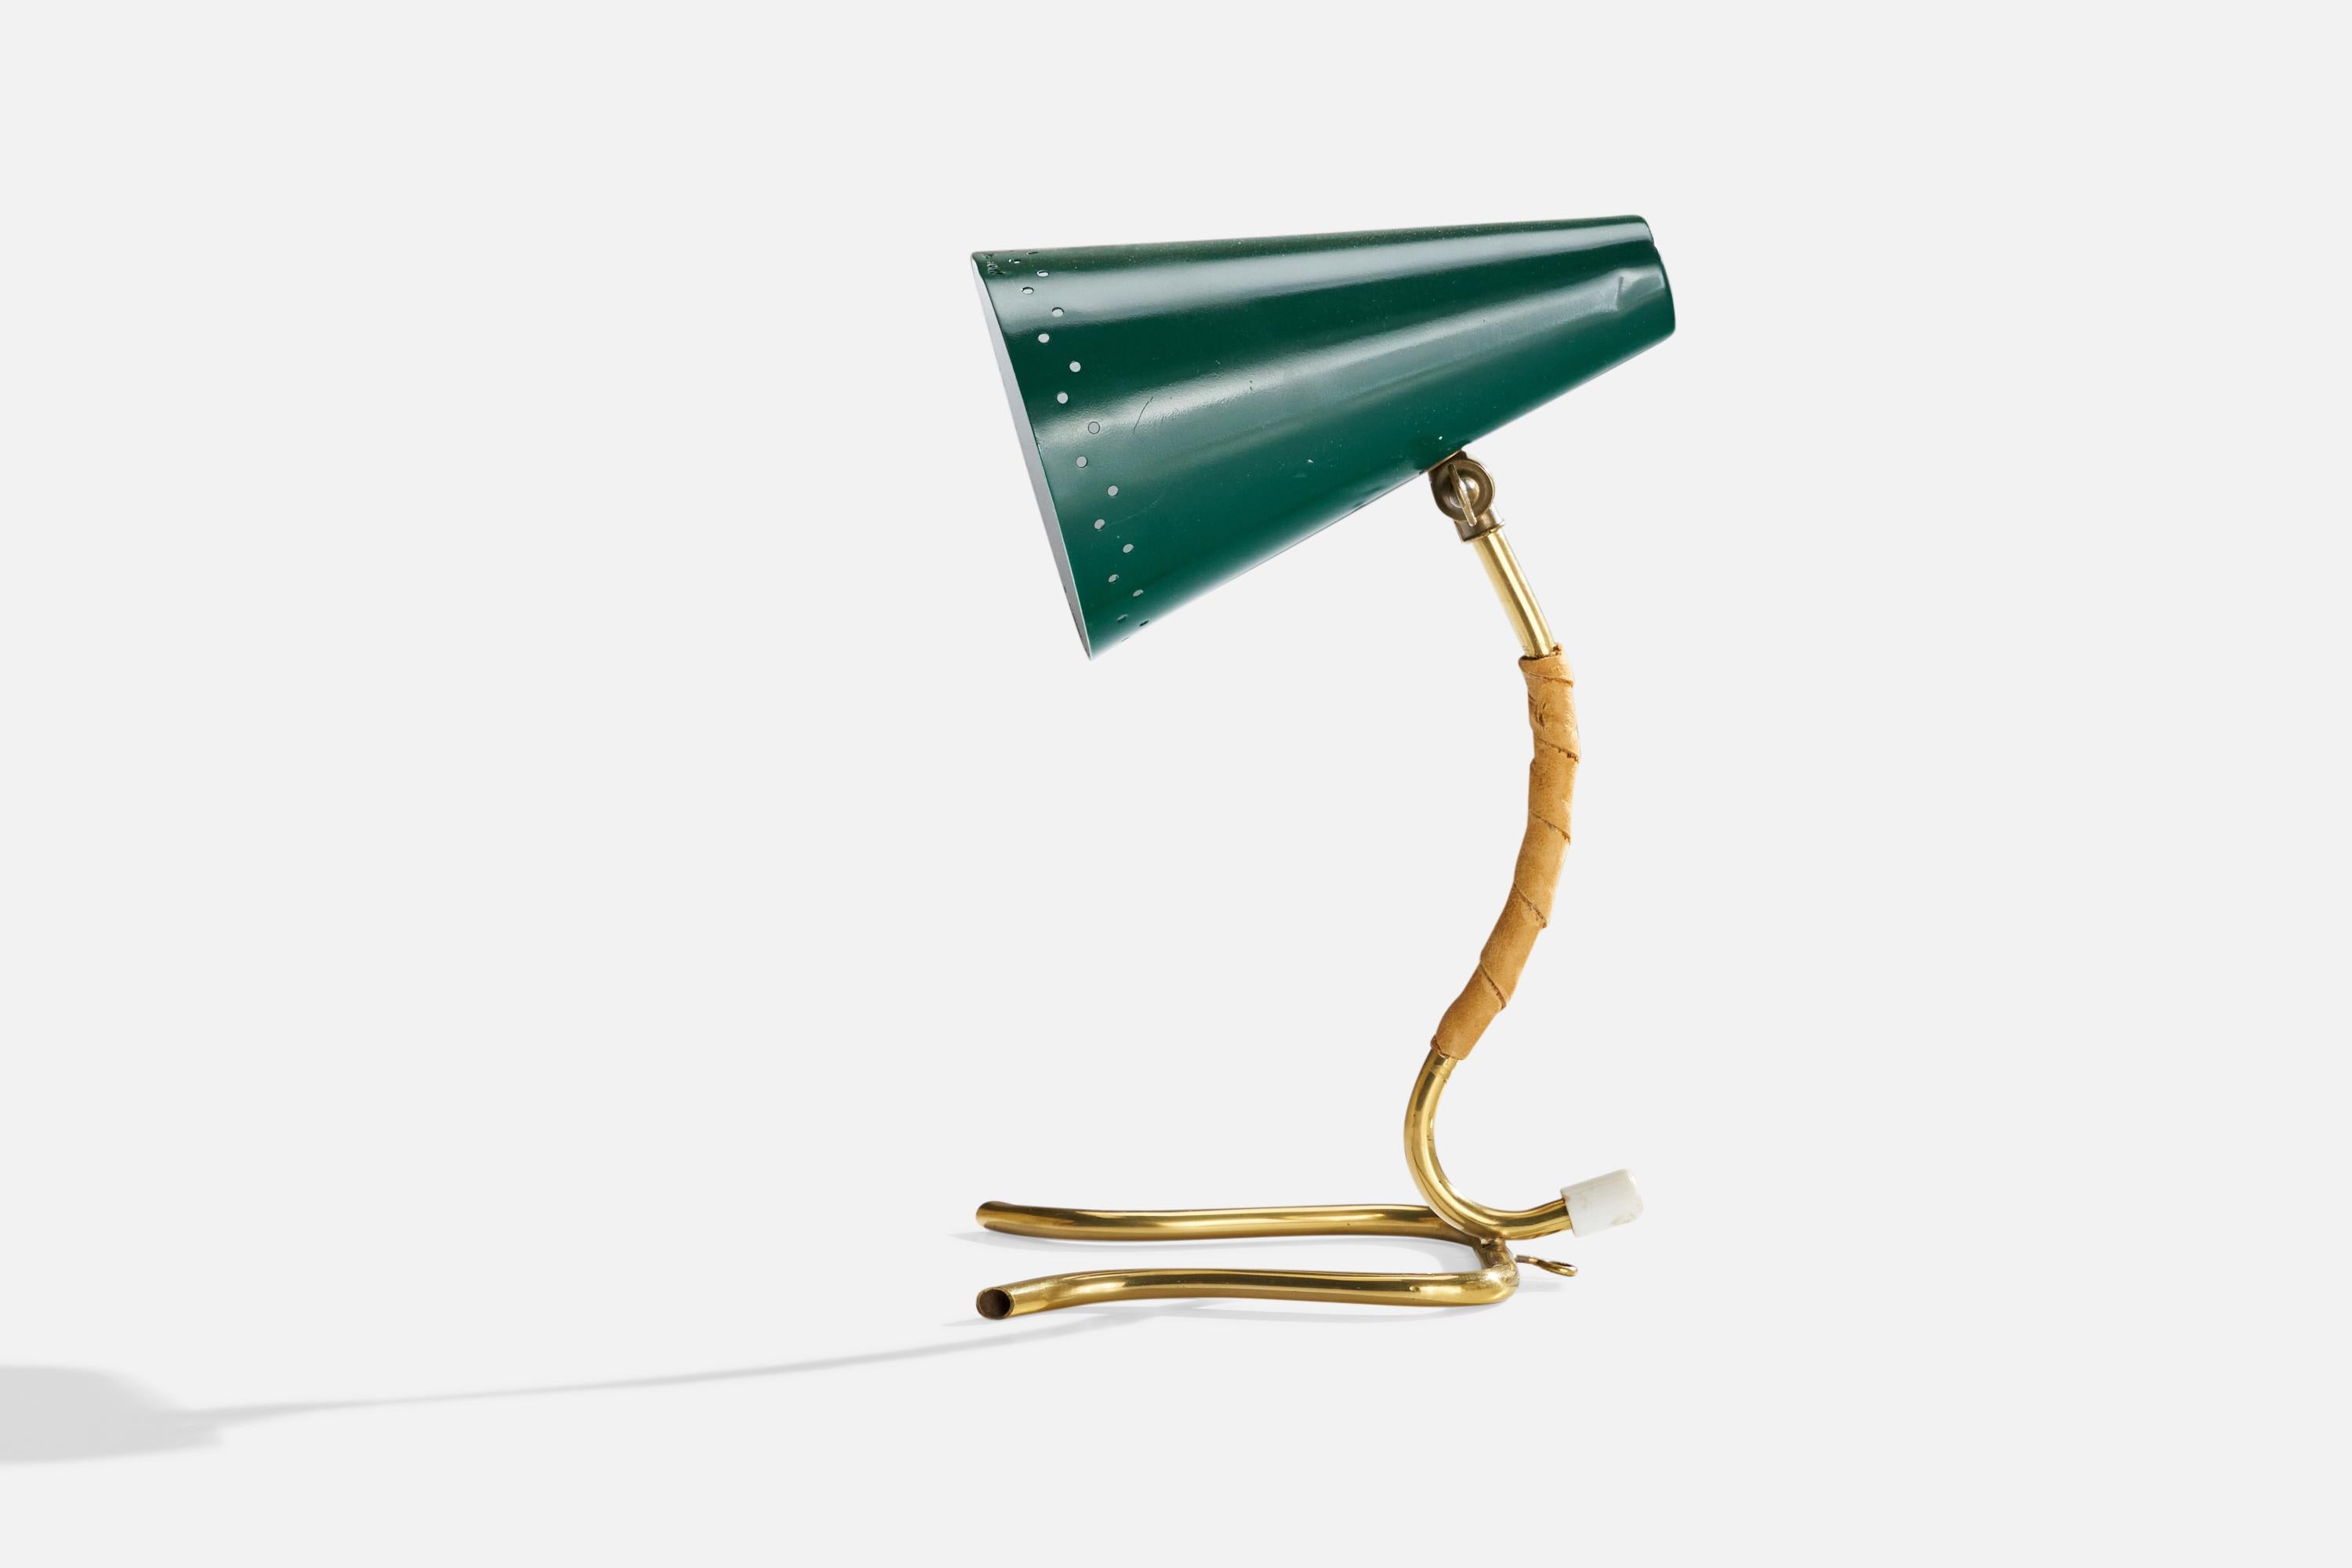 An adjustable brass, leather and green lacquer table lamp designed and produced in Sweden, 1950s.

Overall Dimensions (inches): 12.5”  H x 6.25” W x 8” D
Stated dimensions include shade.
Bulb Specifications: E-26 Bulb
Number of Sockets: 1
All